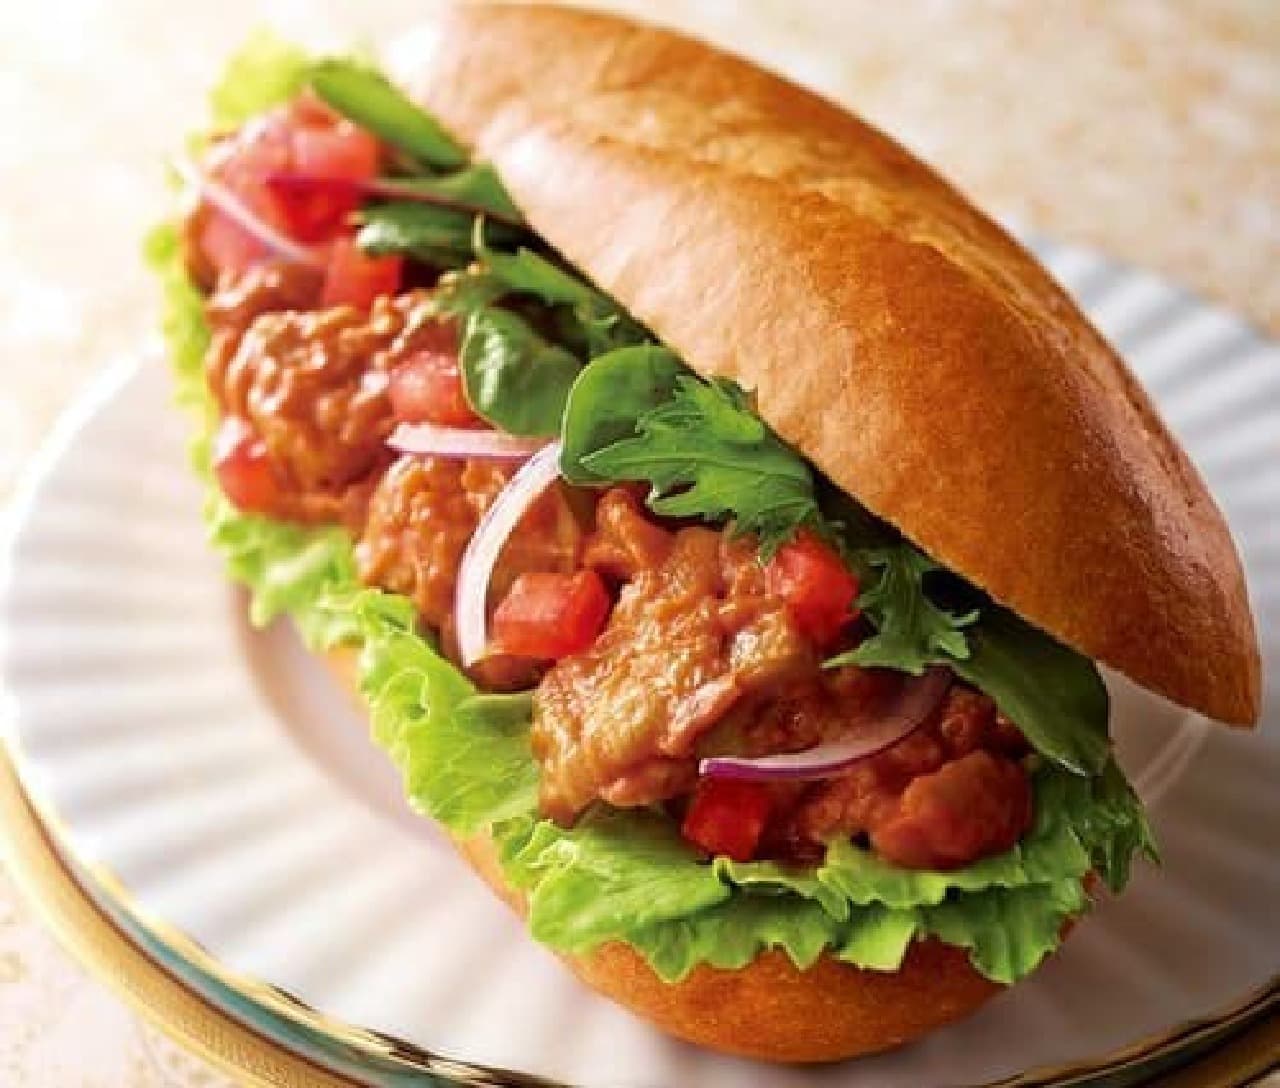 Everyone's favorite butter chicken curry is a sandwich!